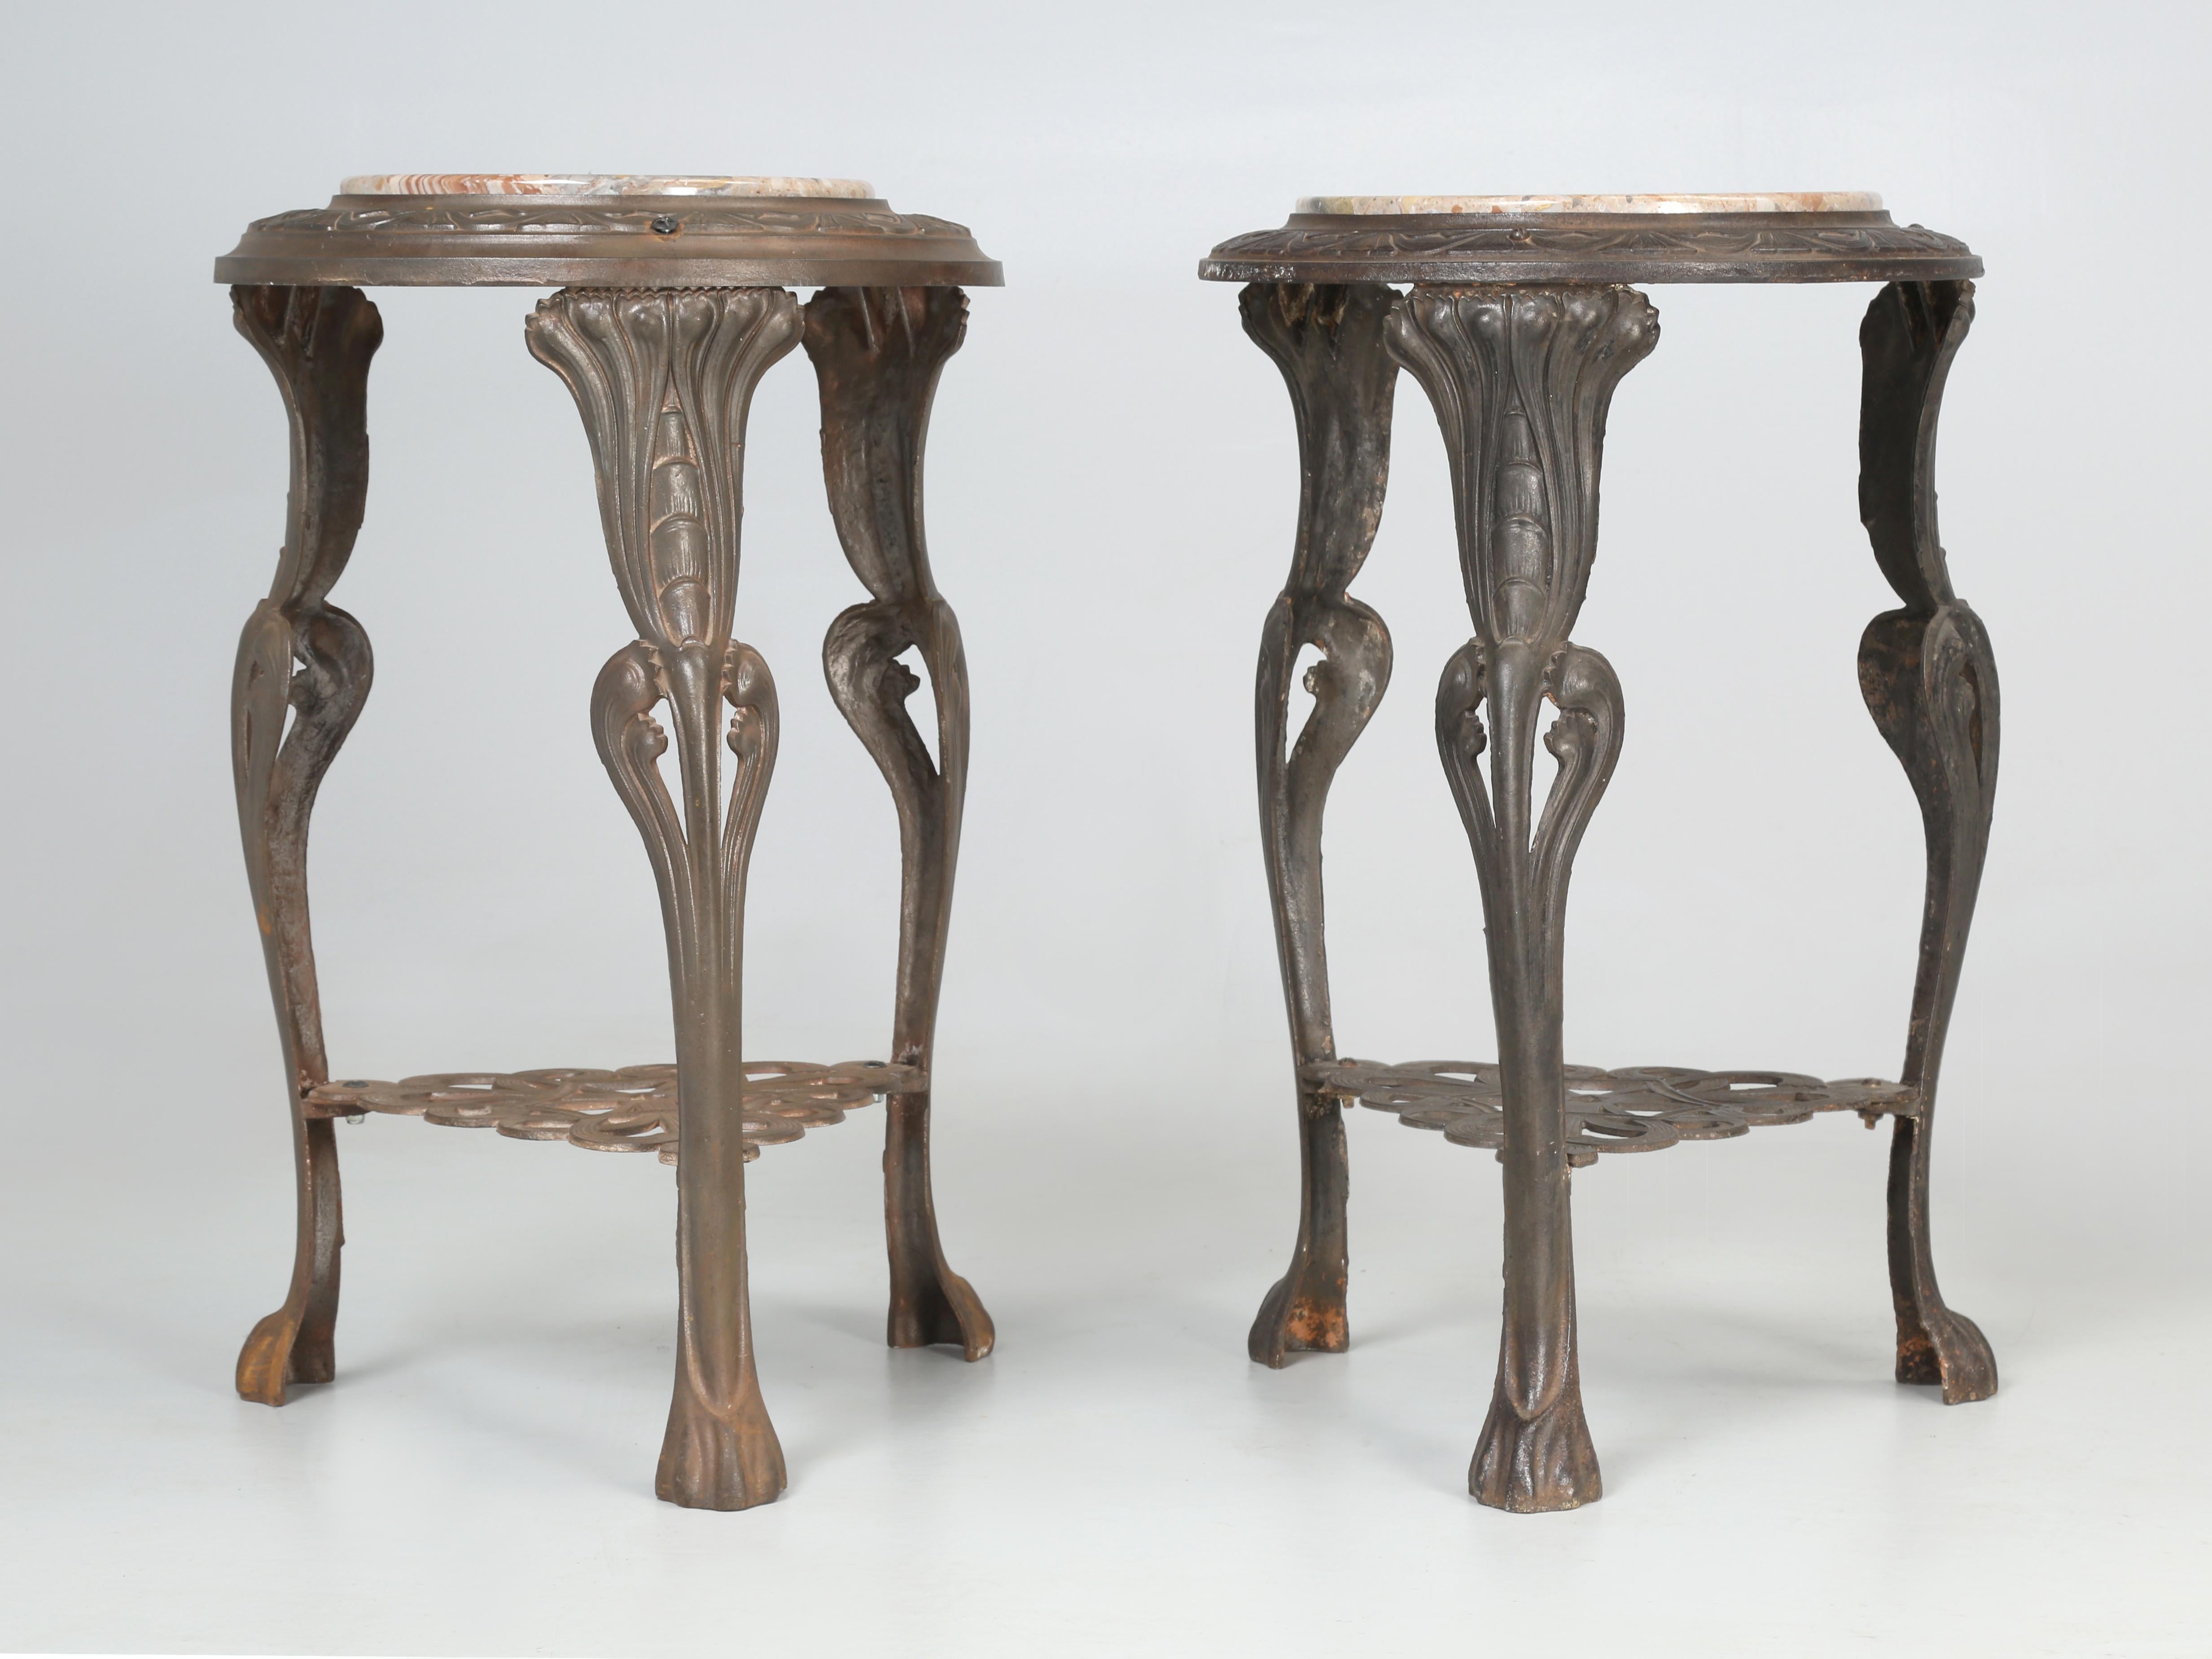 Near Pair of French Art Nouveau Guéridon Cast Iron Tables with Stone Tops For Sale 4